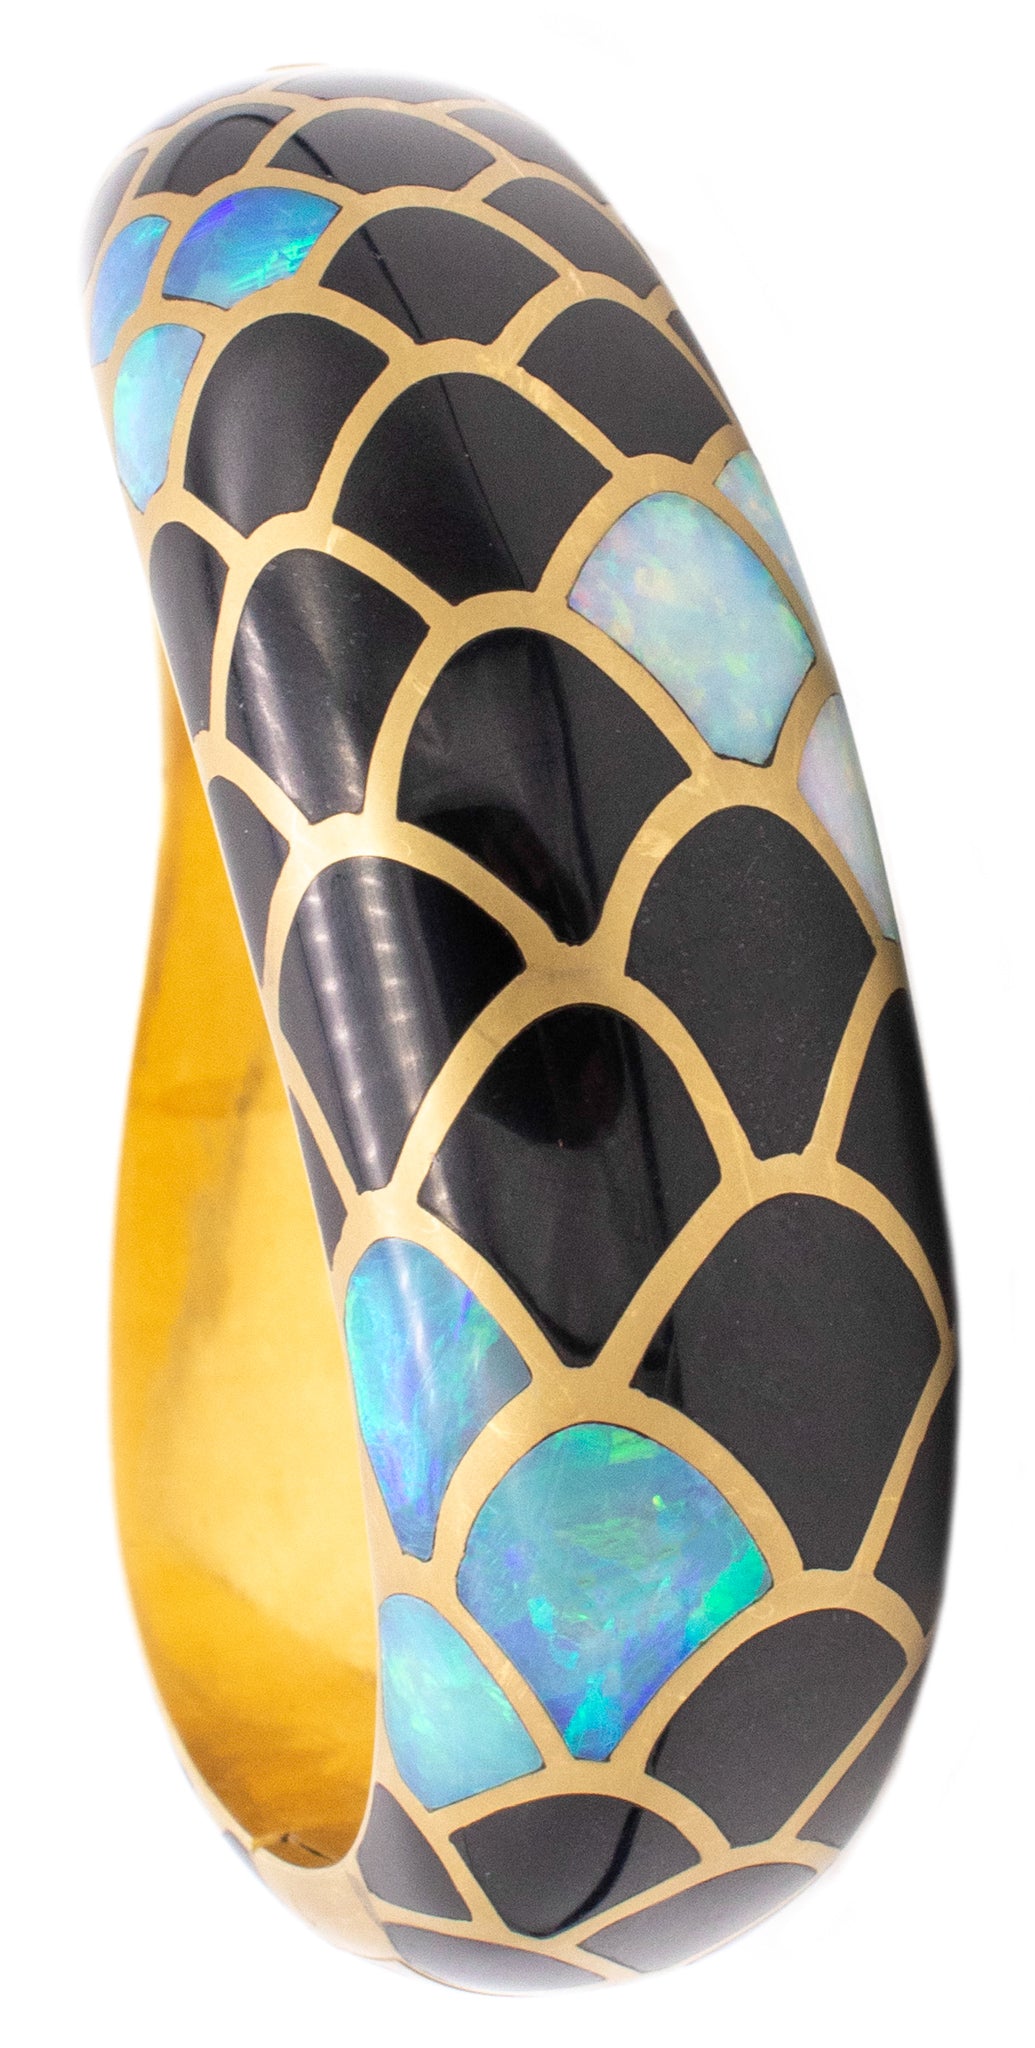 Angela Cummings Studios Bangle Bracelet In 18Kt Yellow Gold With Inlaid Opals & Black Jade